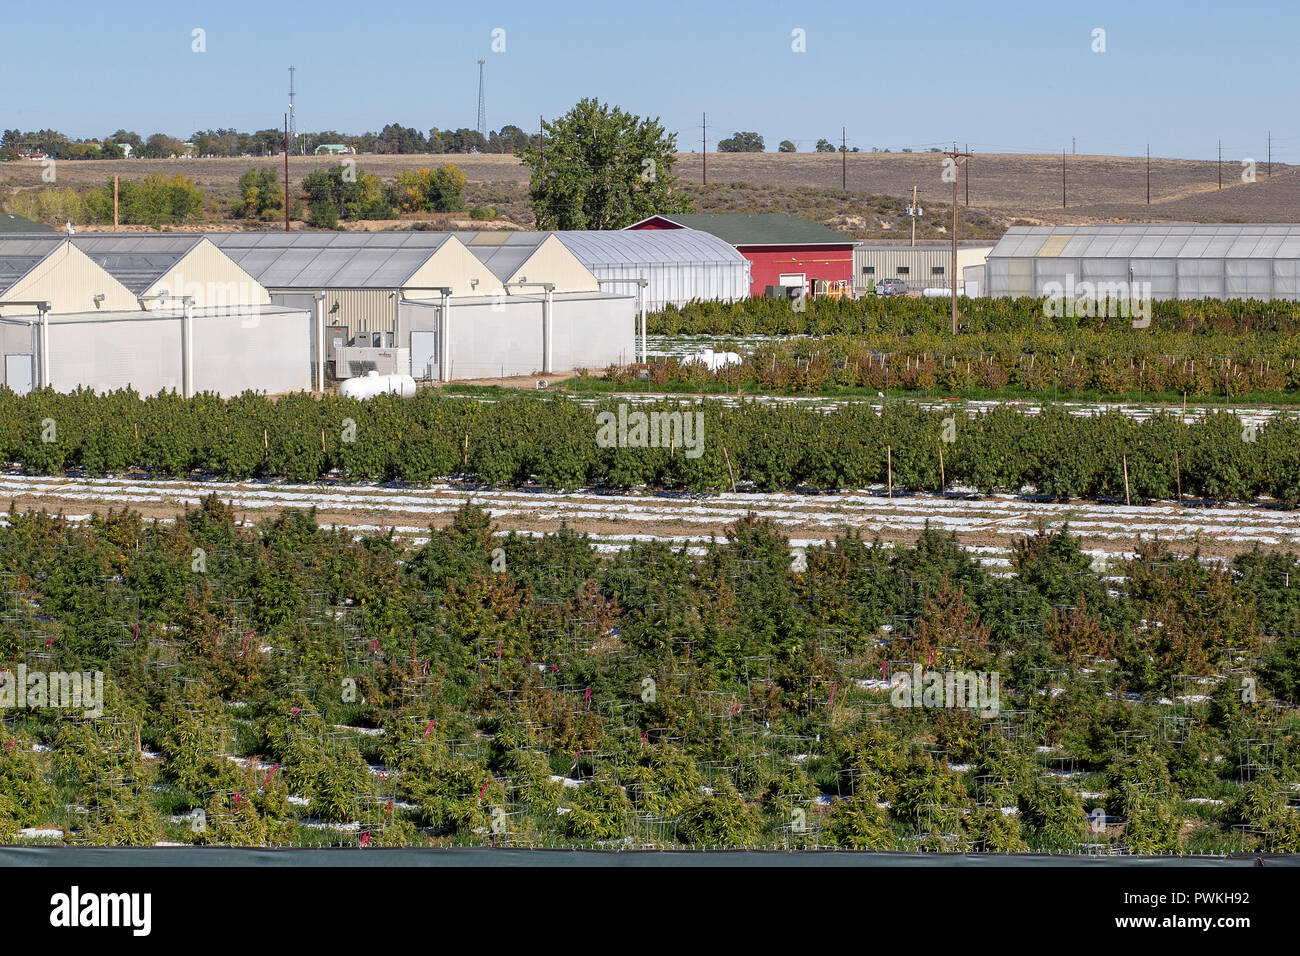 Outdoor legal cannabis or marijuana farm at harvest time near Pueblo, Colorado.Licensed by the state of Colorado since 2014. Stock Photo